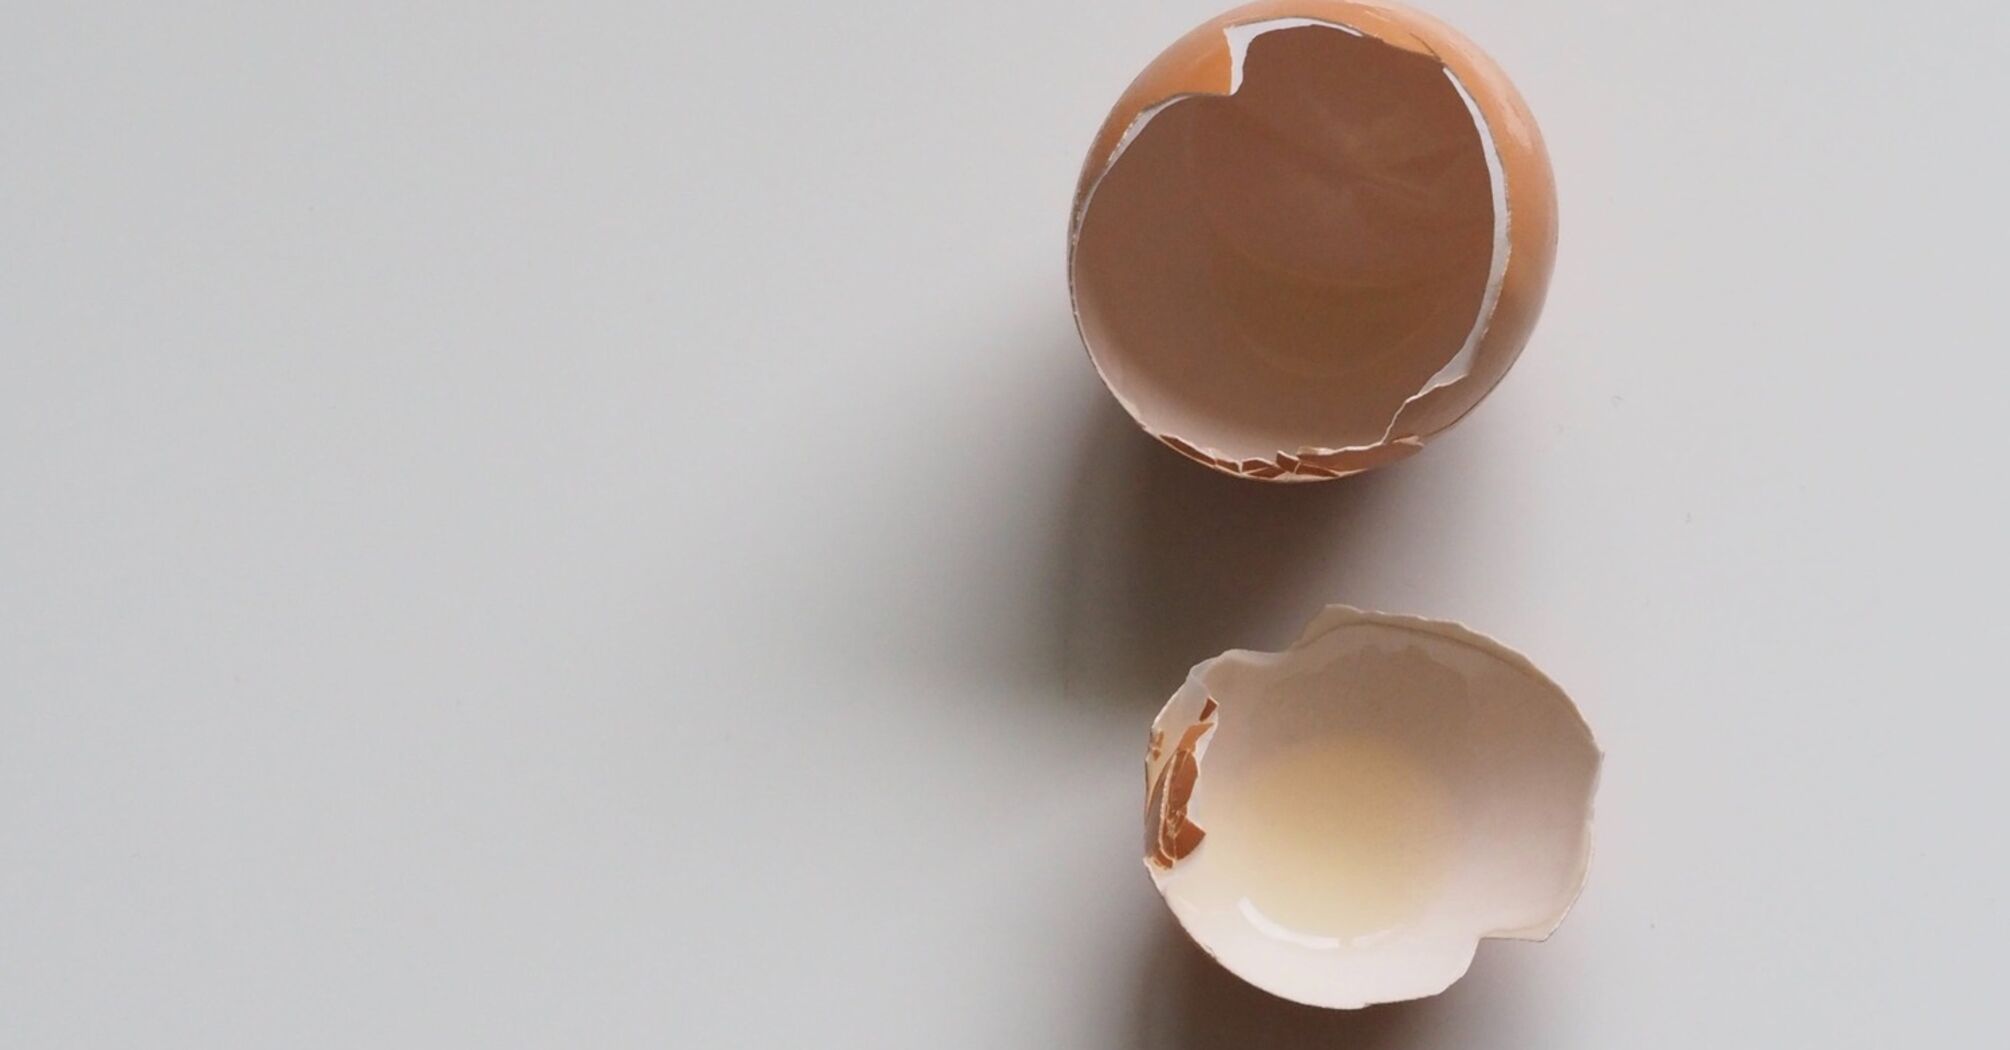 How to use eggs in everyday life: Interesting ways